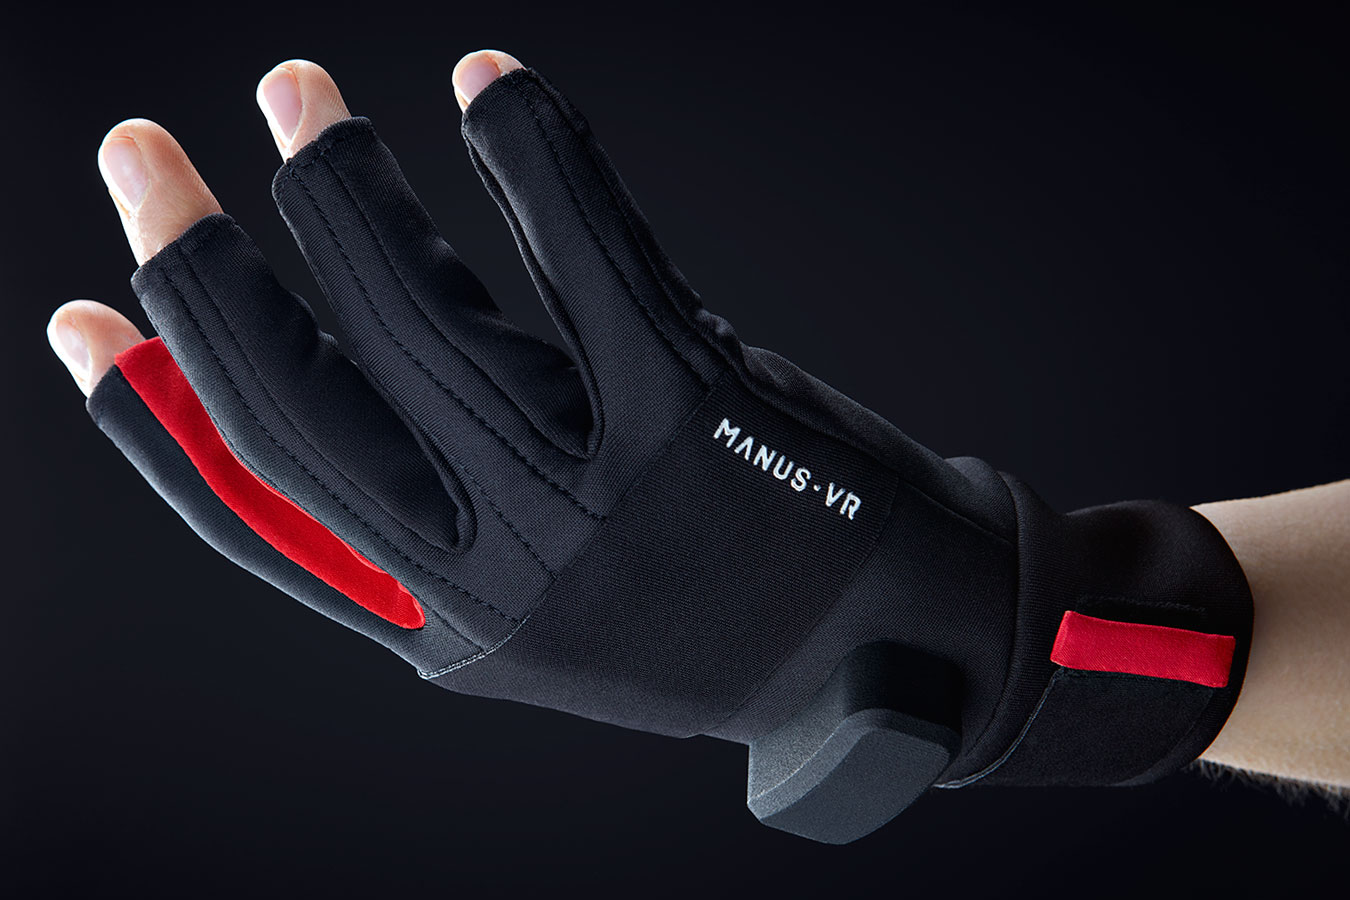 Día del Maestro suelo Intenso Manus VR gloves let you reach out and touch the future | Digital Trends